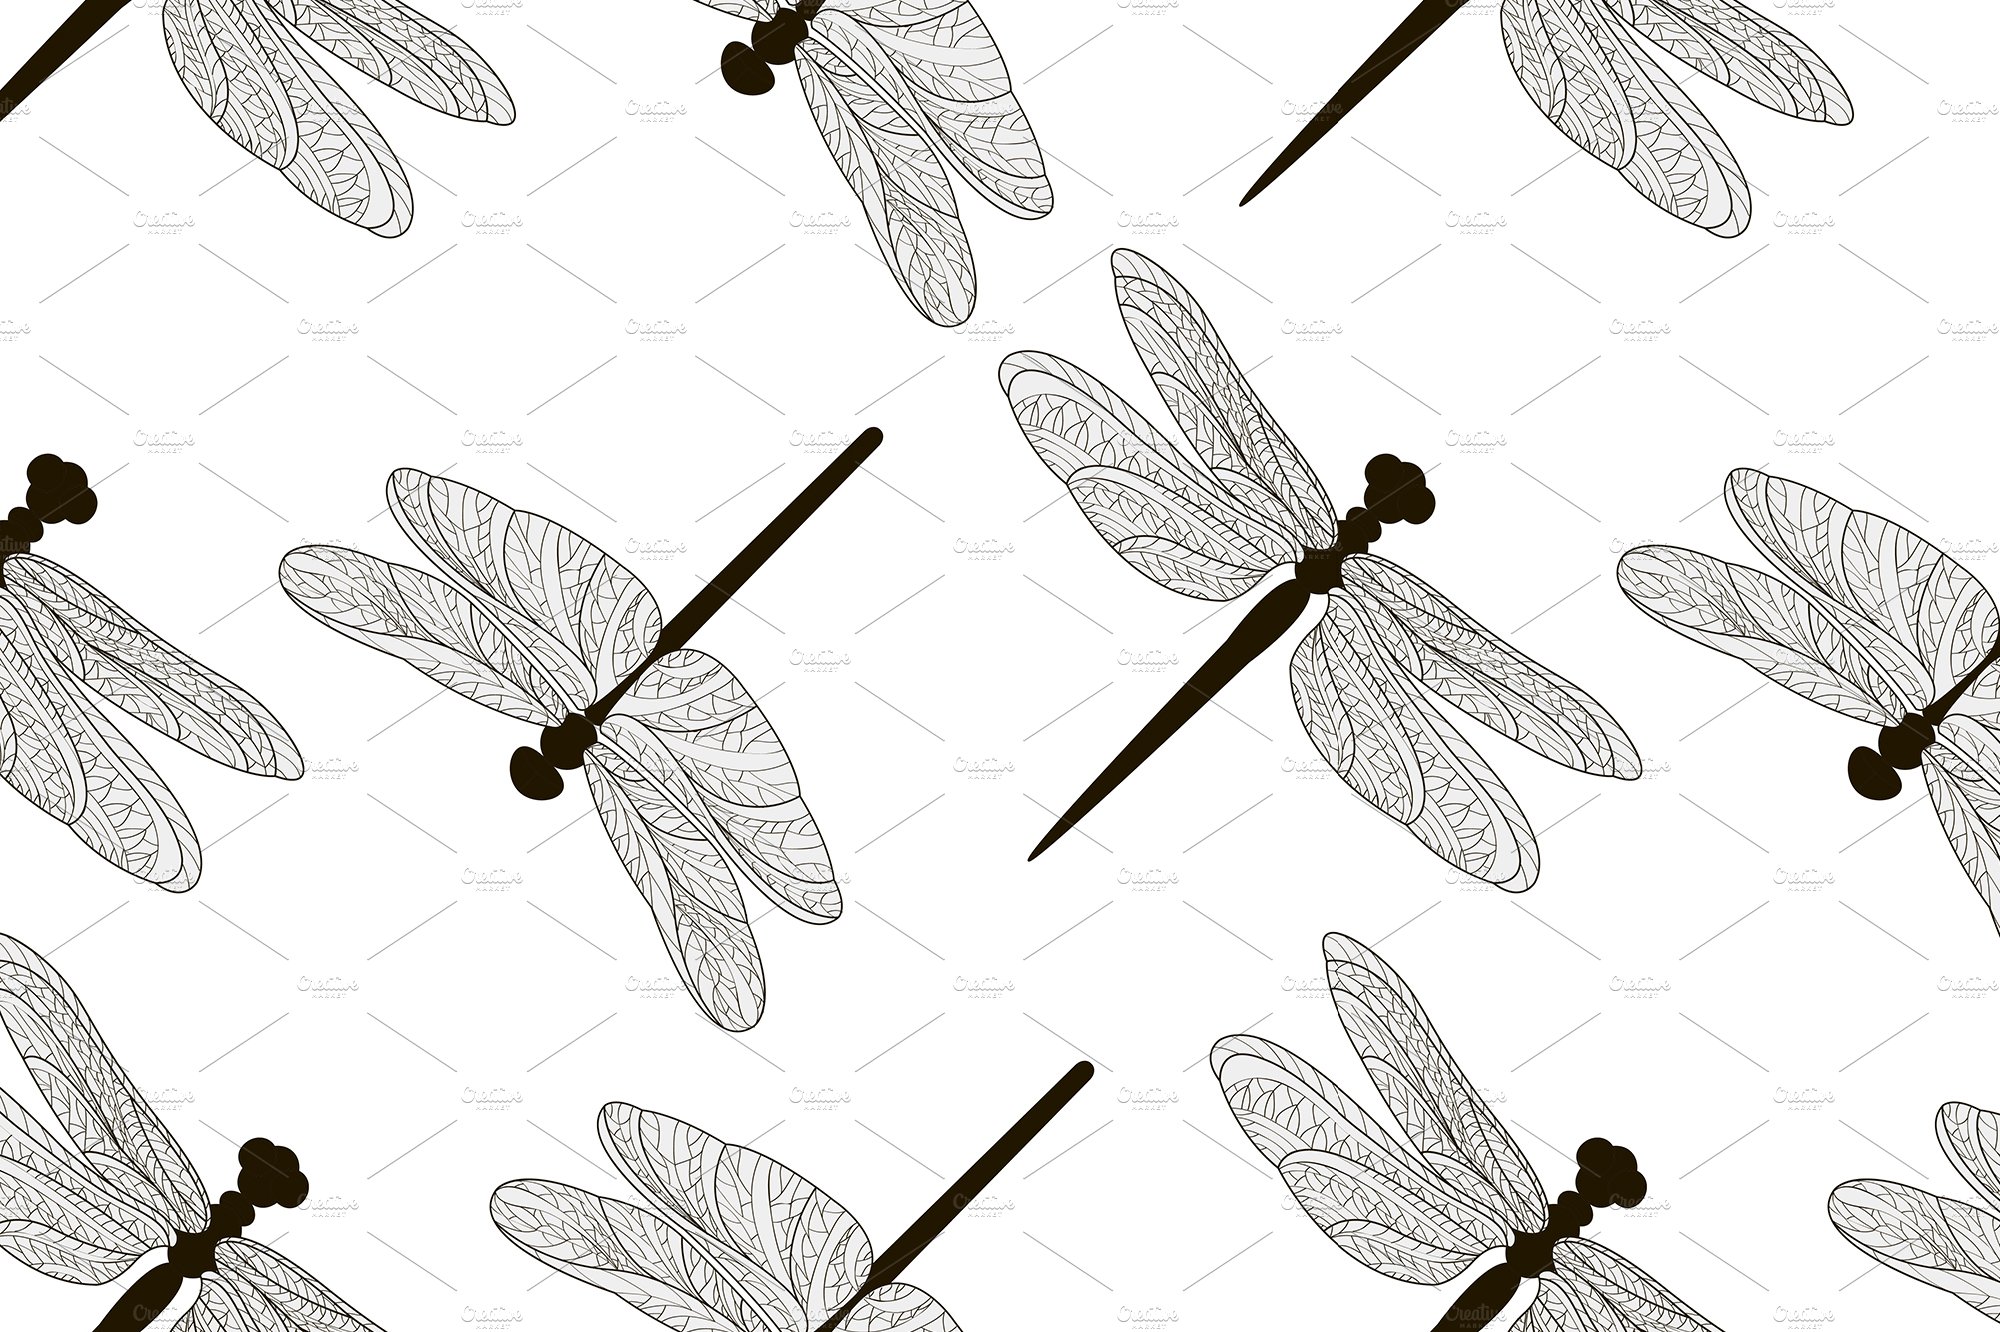 Pattern of silhouettes of dragonflie cover image.